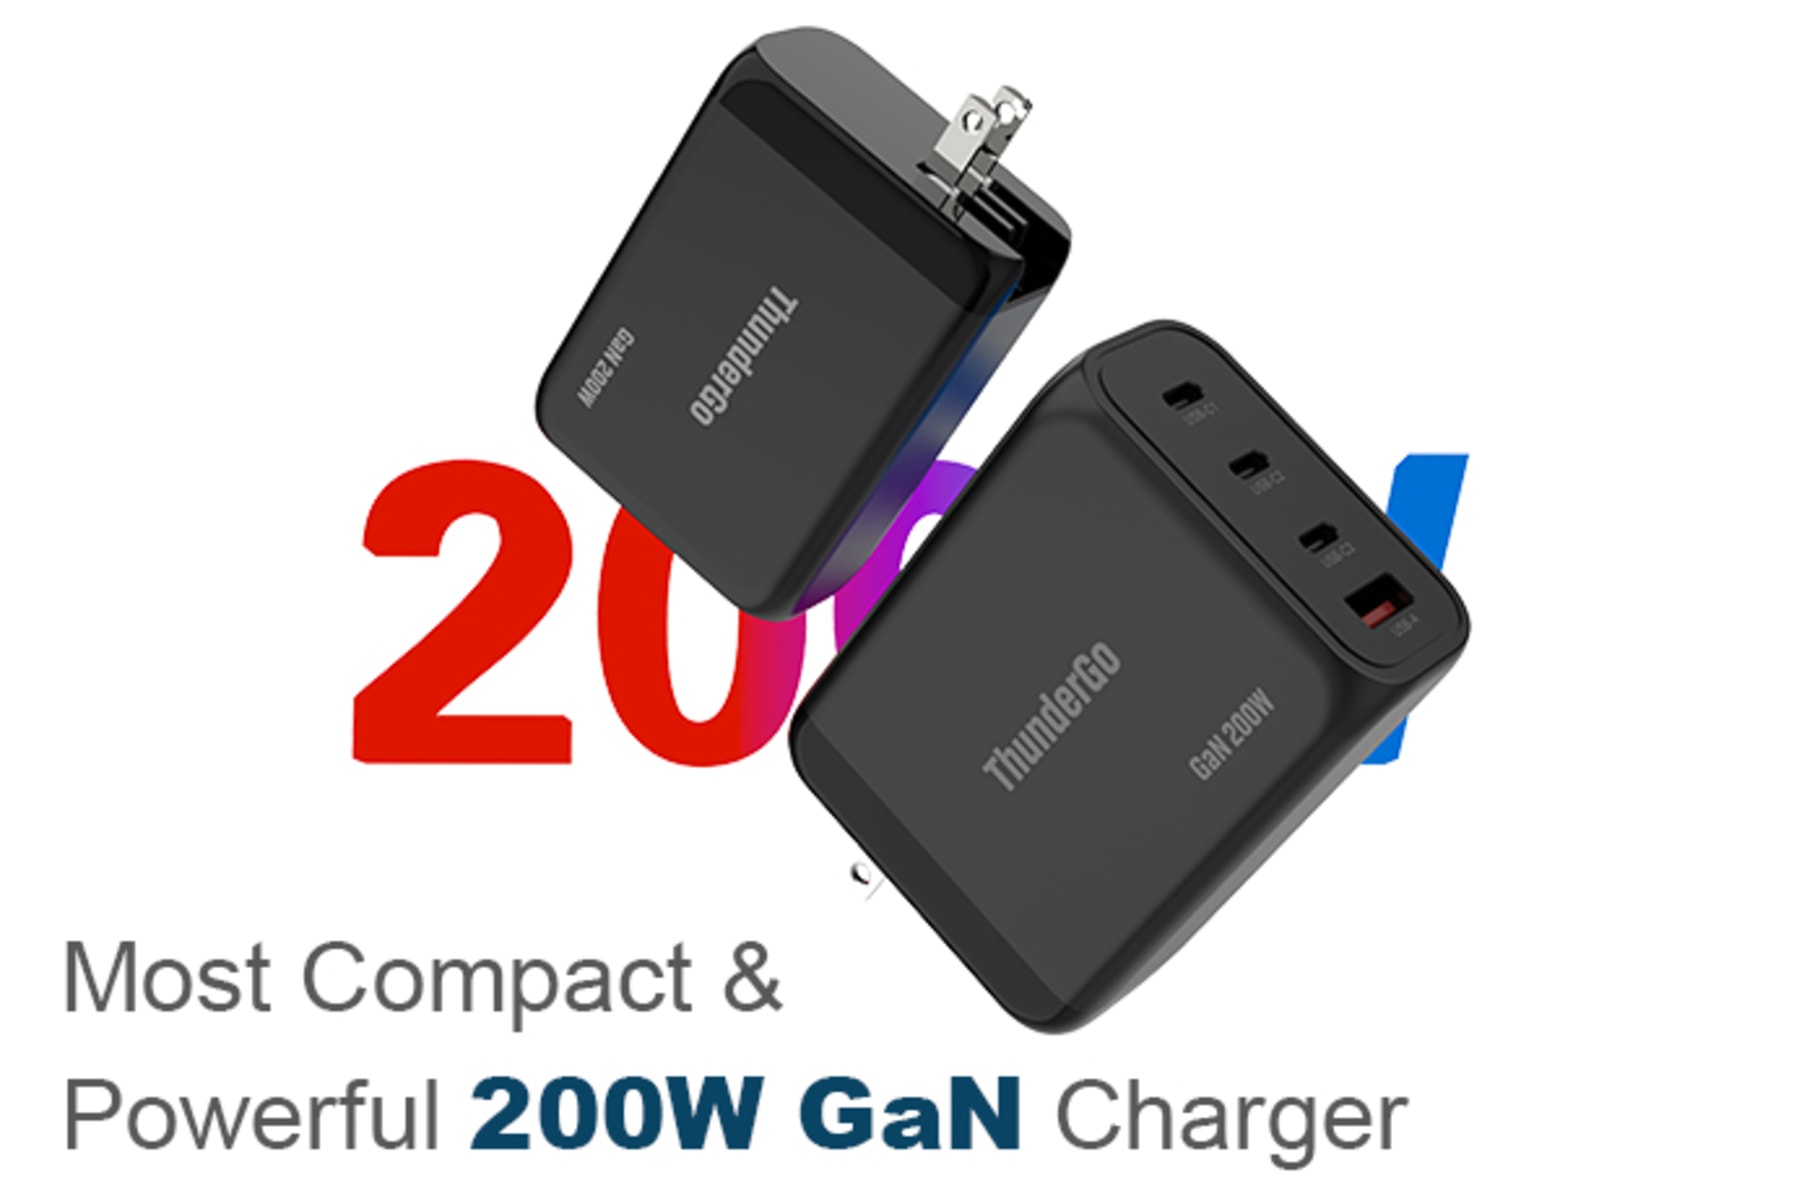 ThunderGo:Most Compact & Powerful 200W GaN Charger